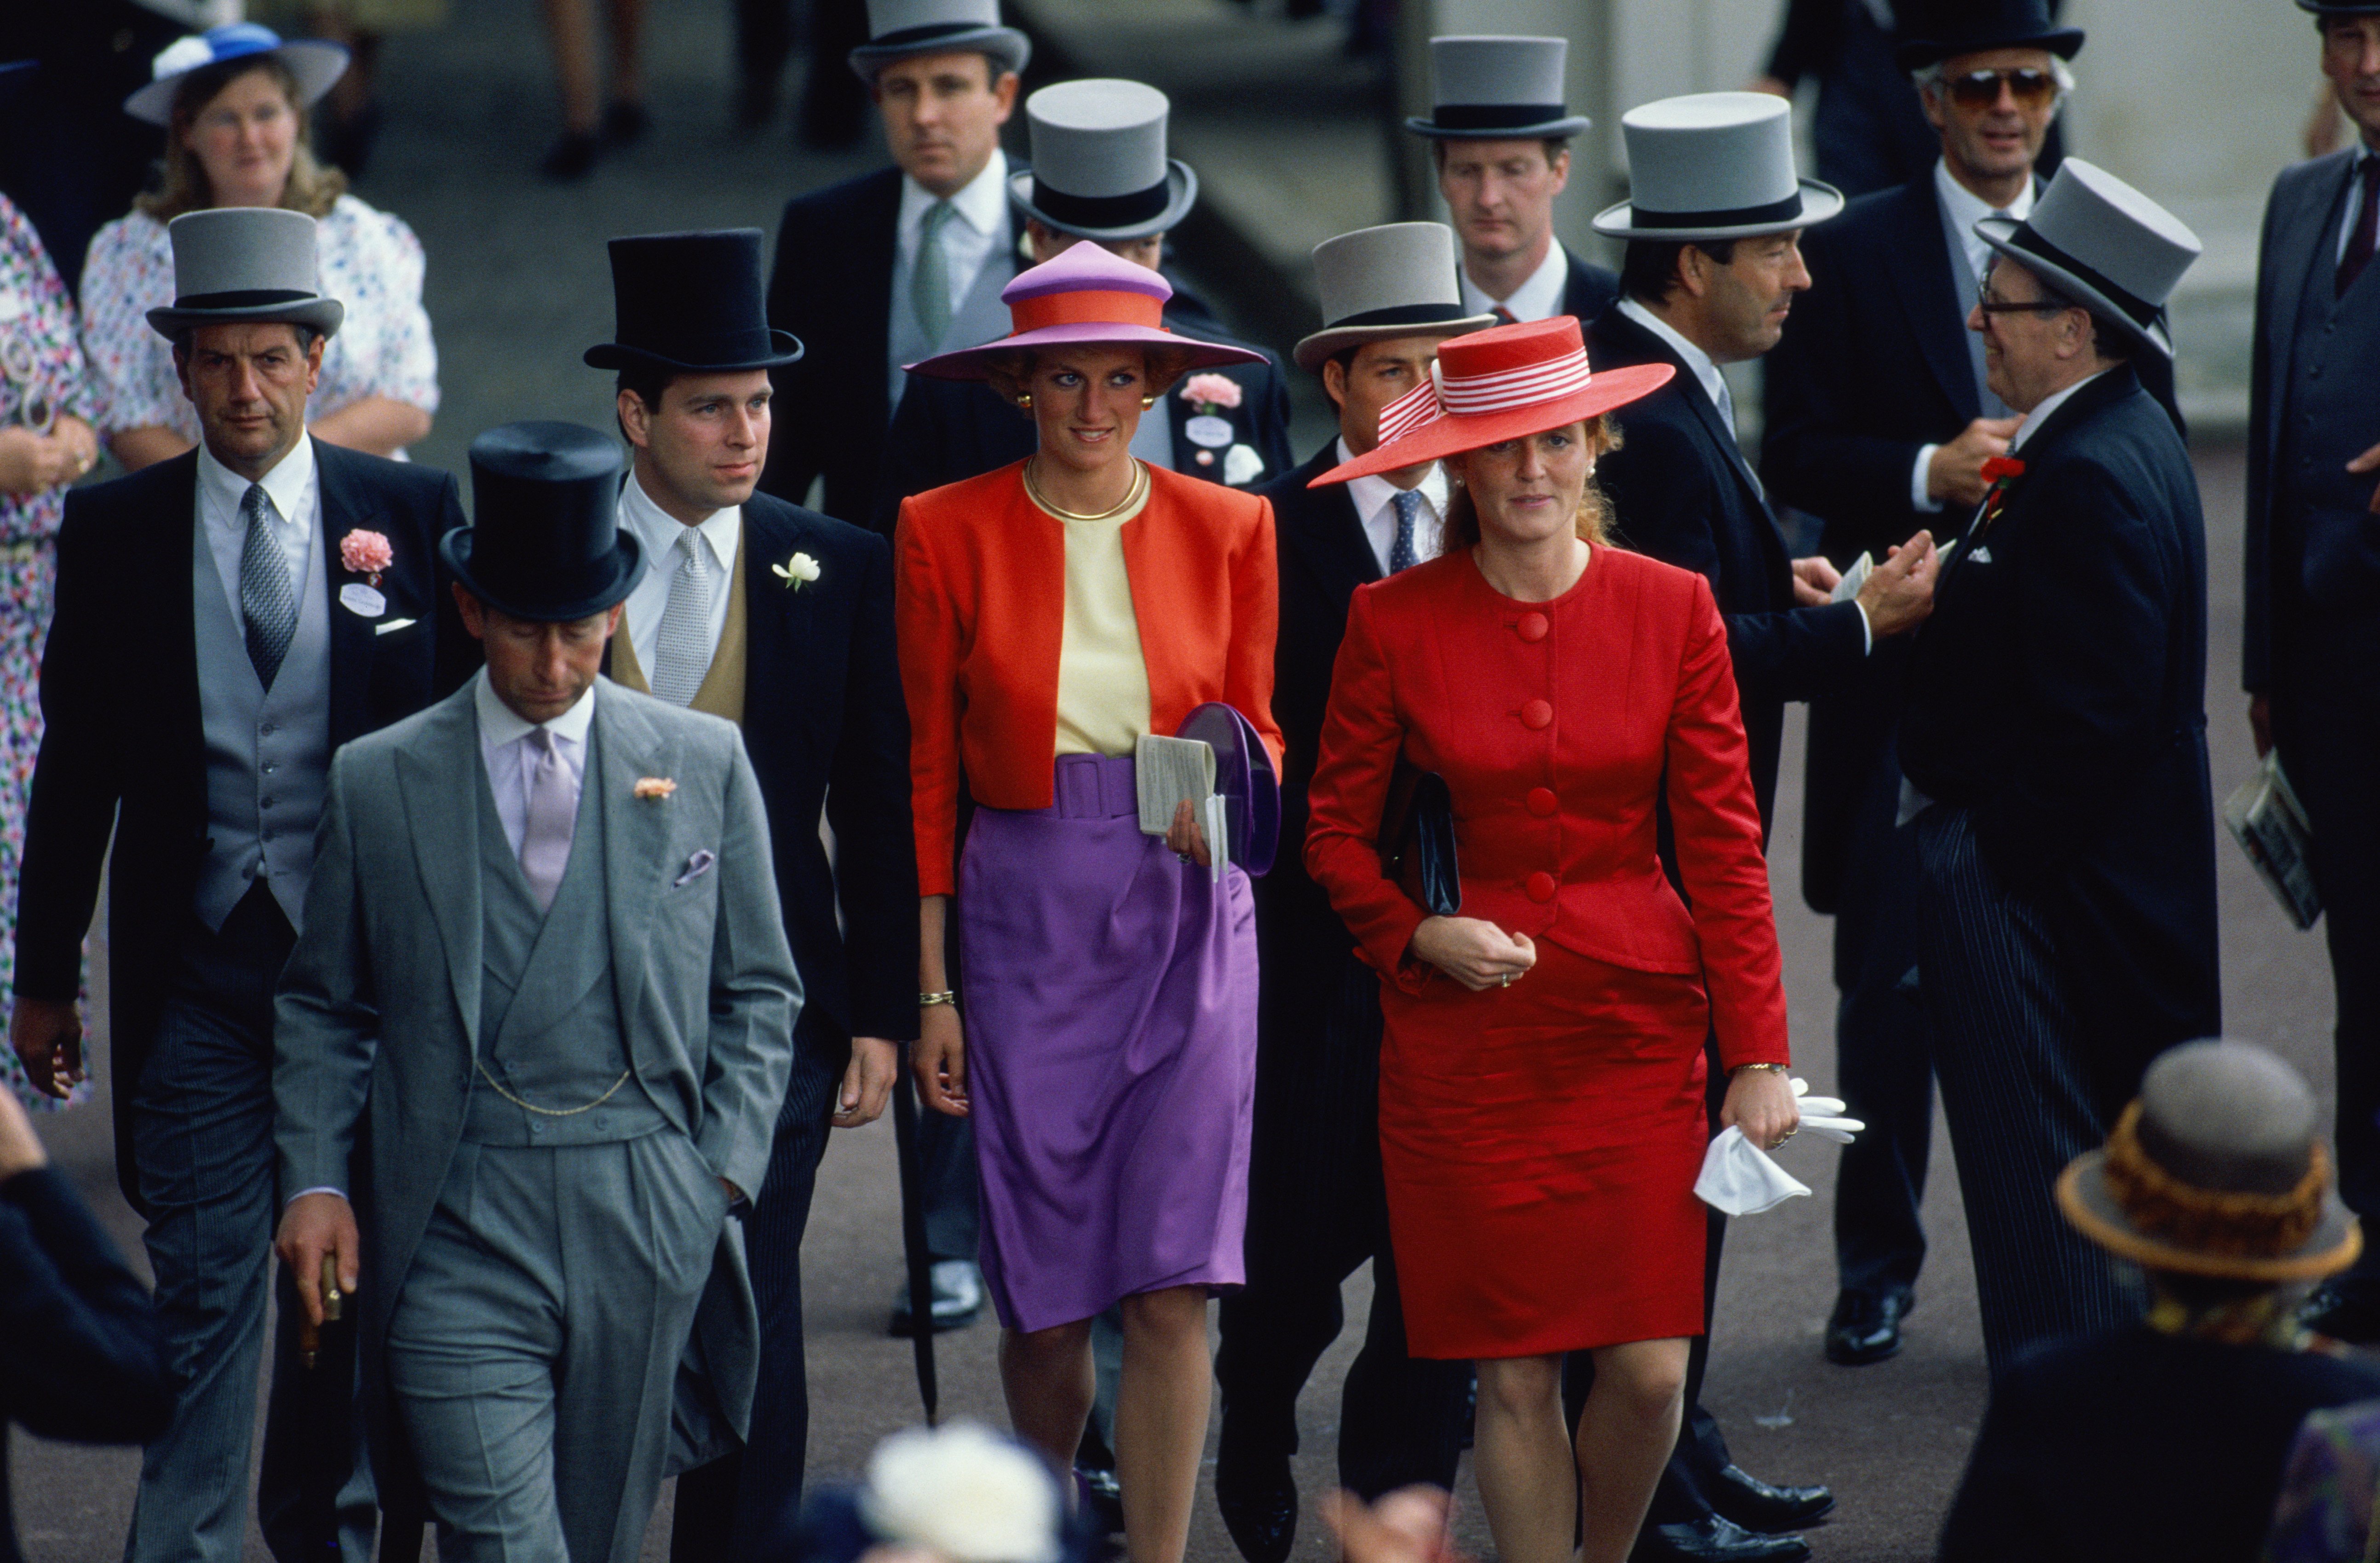 Princess Diana with Prince Charles, Sarah Ferguson and Prince Andrew at The Royal Ascot race meeting in June 1990. / Source: Getty Images